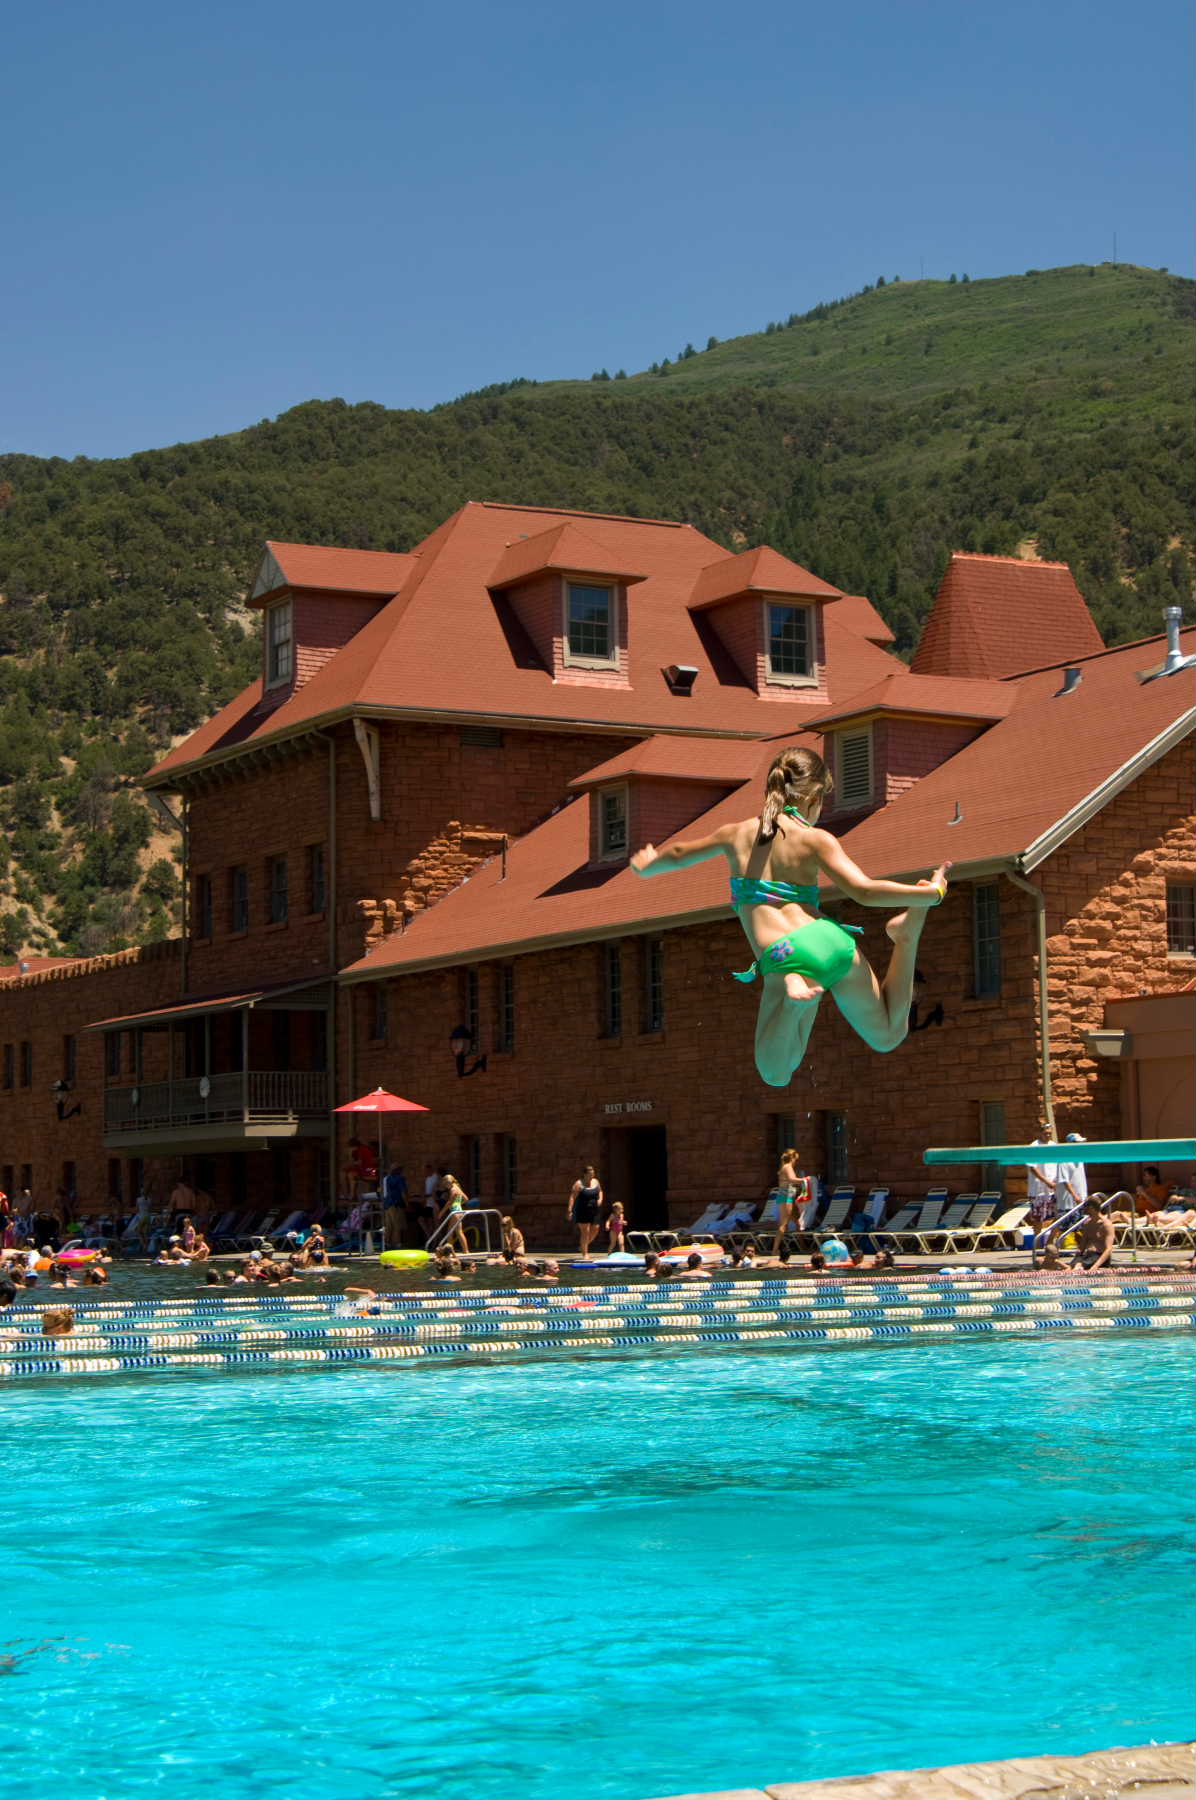 The Glenwood Hot Springs Pool is a fun place to spend a spring day